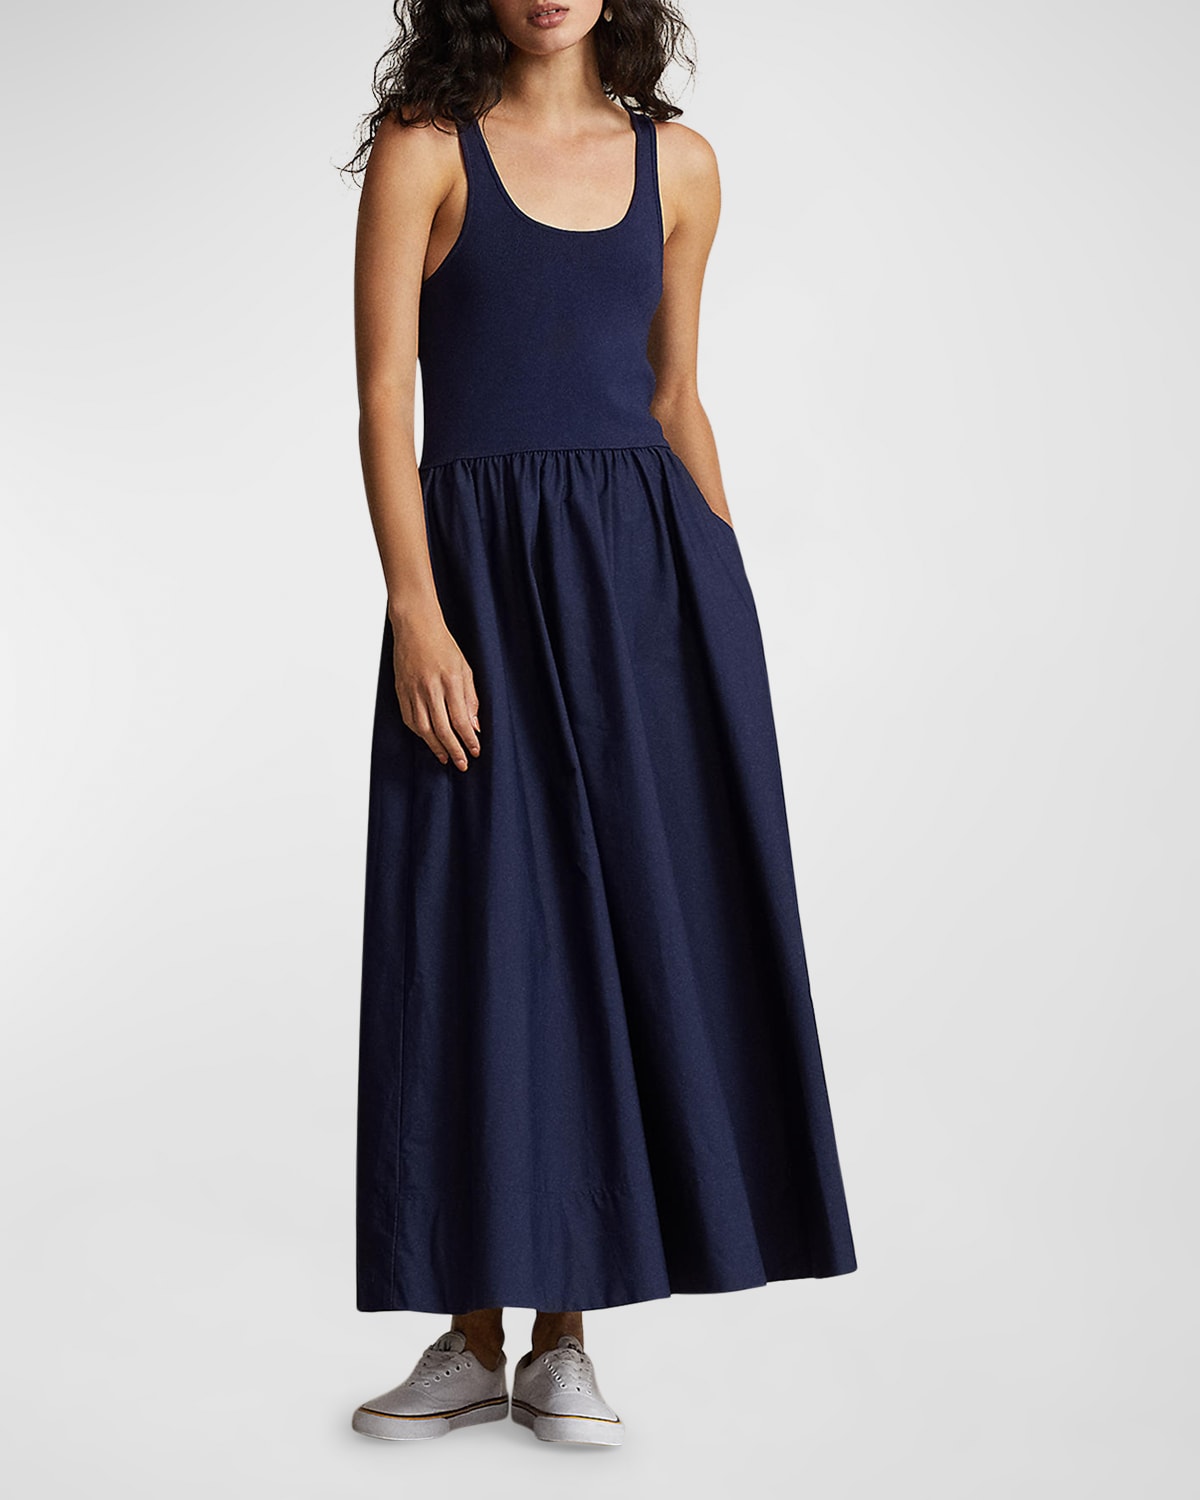 POLO RALPH LAUREN SHIRRED FIT-&-FLARE MAXI DRESS